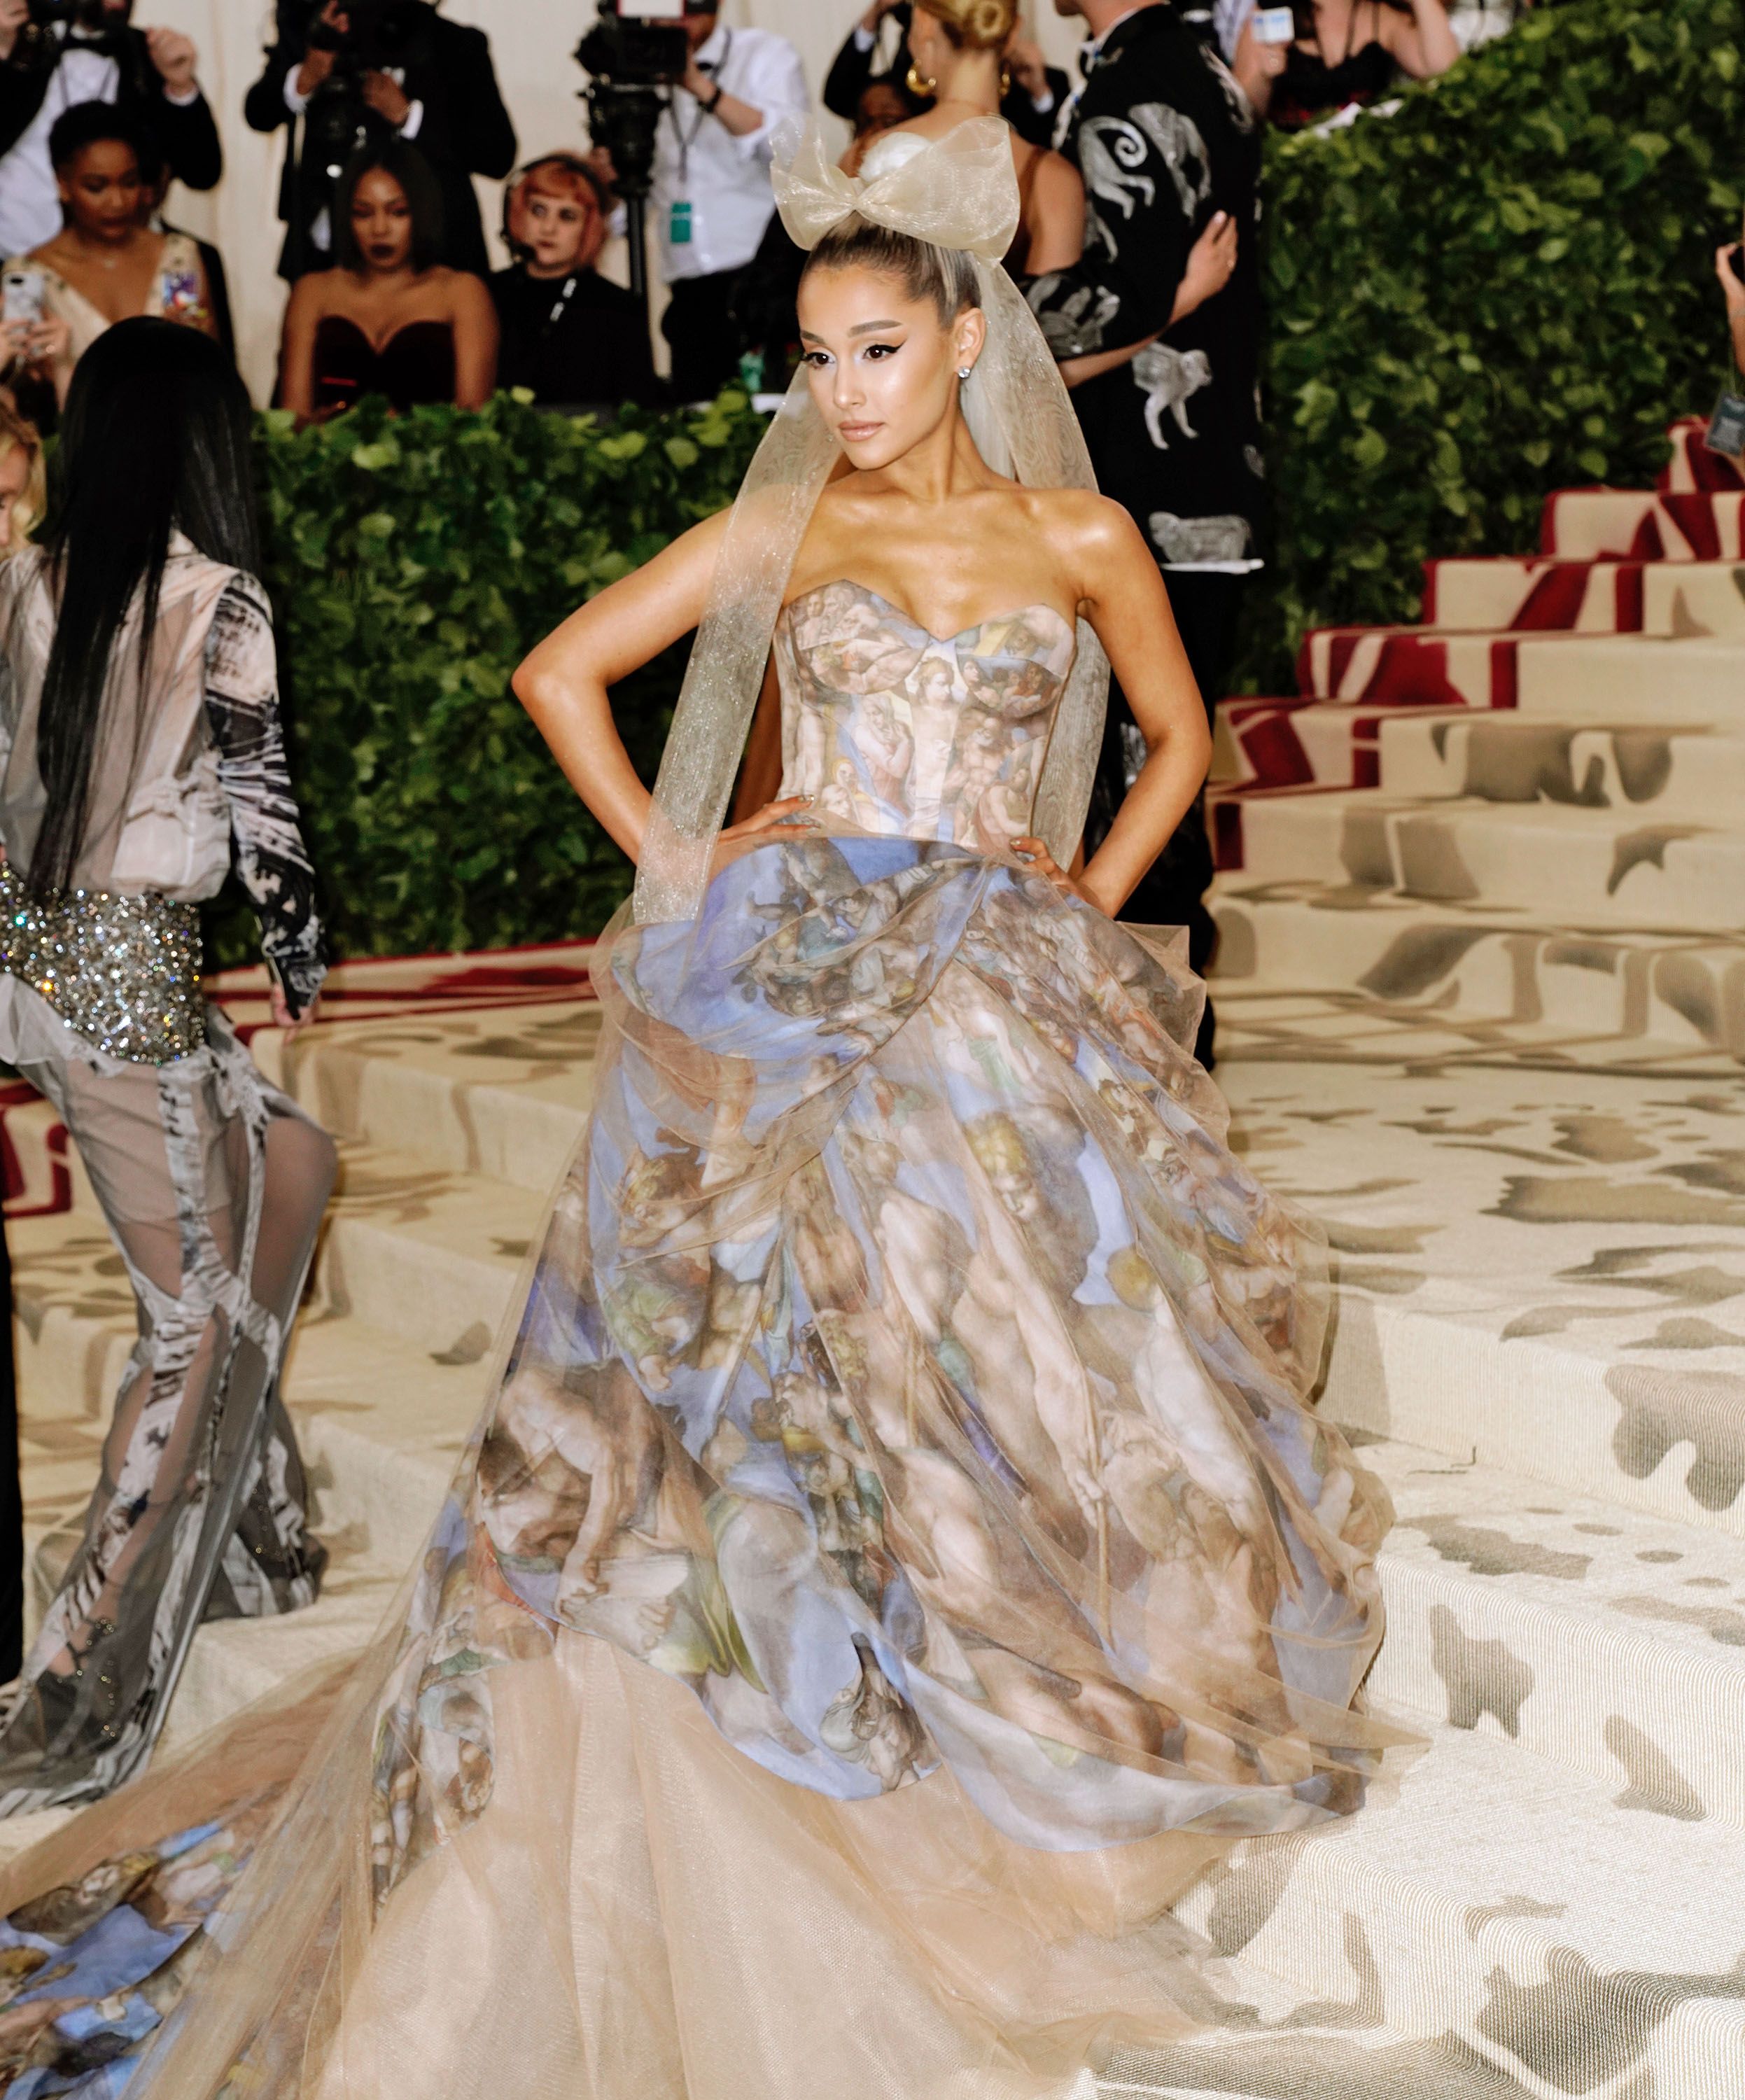 Why are celebs skipping the met gala